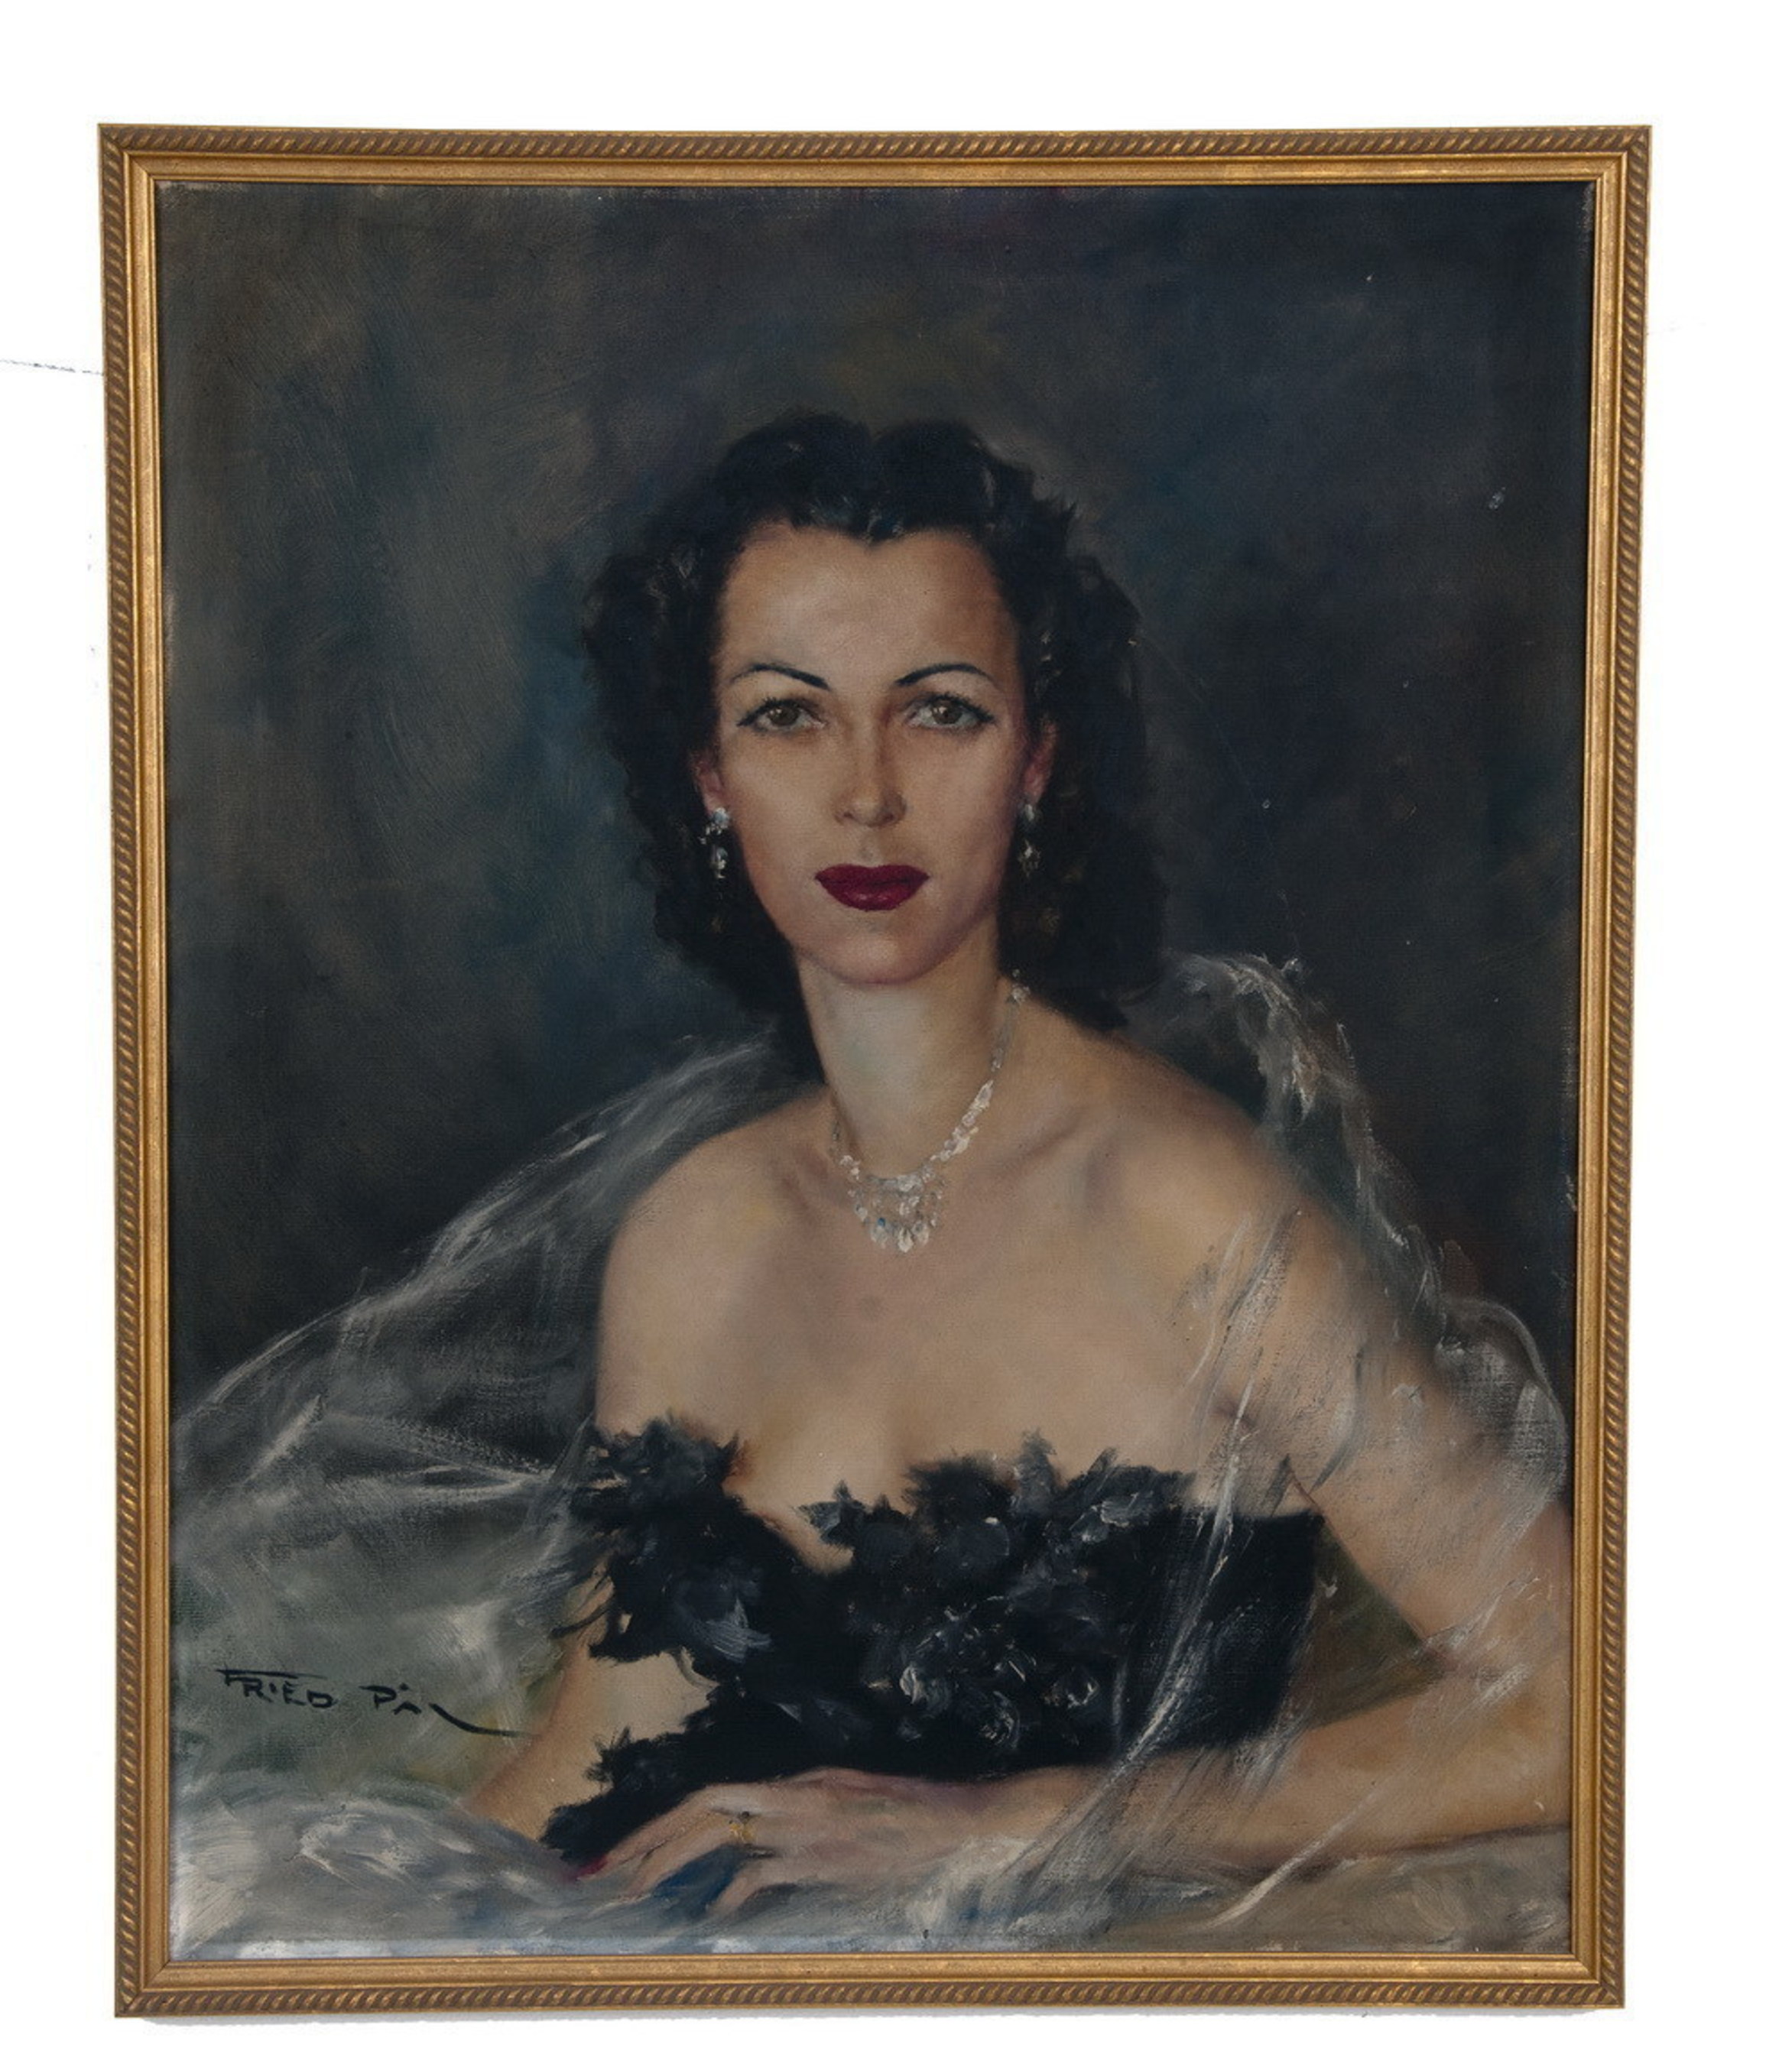 This portrait of Bess Myerson, the only Jewish Miss America ever crowned and a TV personality in the 1950s and '60s, is one of many fine appointments from her estate that will be available for auction at a sale presented by Abell Auction Company on May 3 in Los Angeles. The auction is expected to draw an international audience of buyers, with live and online bidding starting at 10 a.m. The sale will feature more than 550 lots of fine art, antiques and other items from estates throughout Southern California.